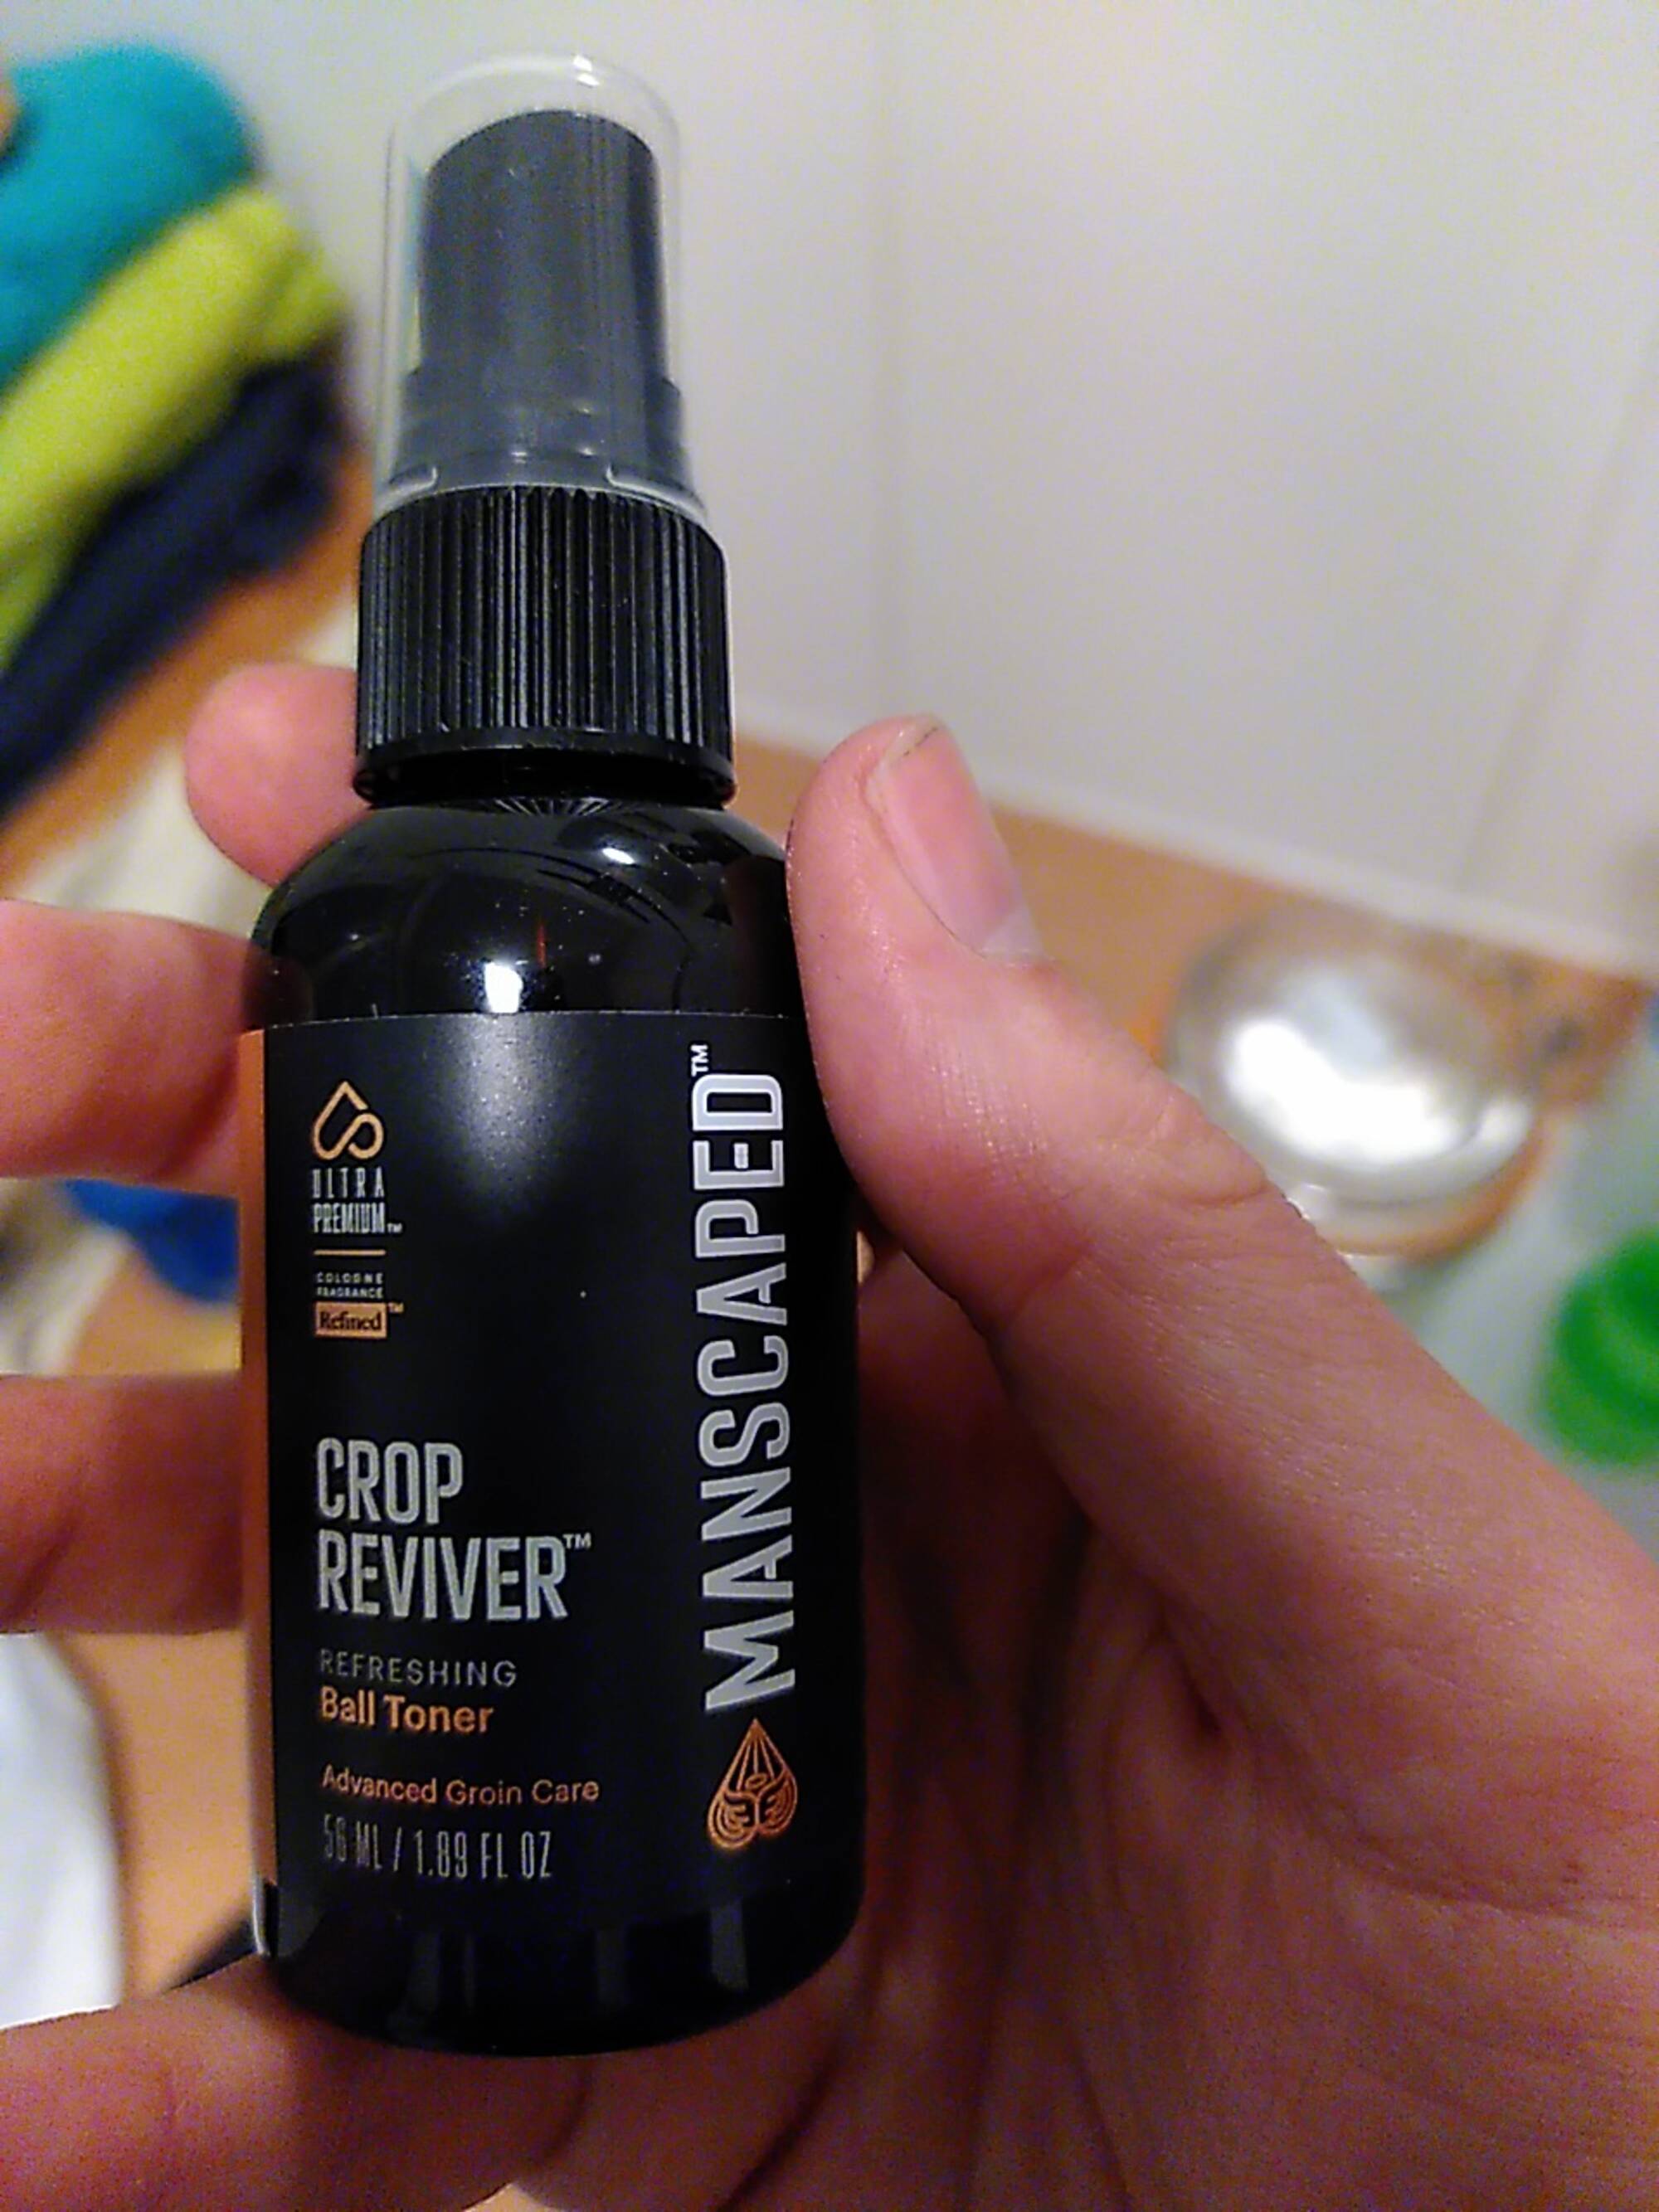 MANSCAPED - Crop reviver - Refreshing ball toner